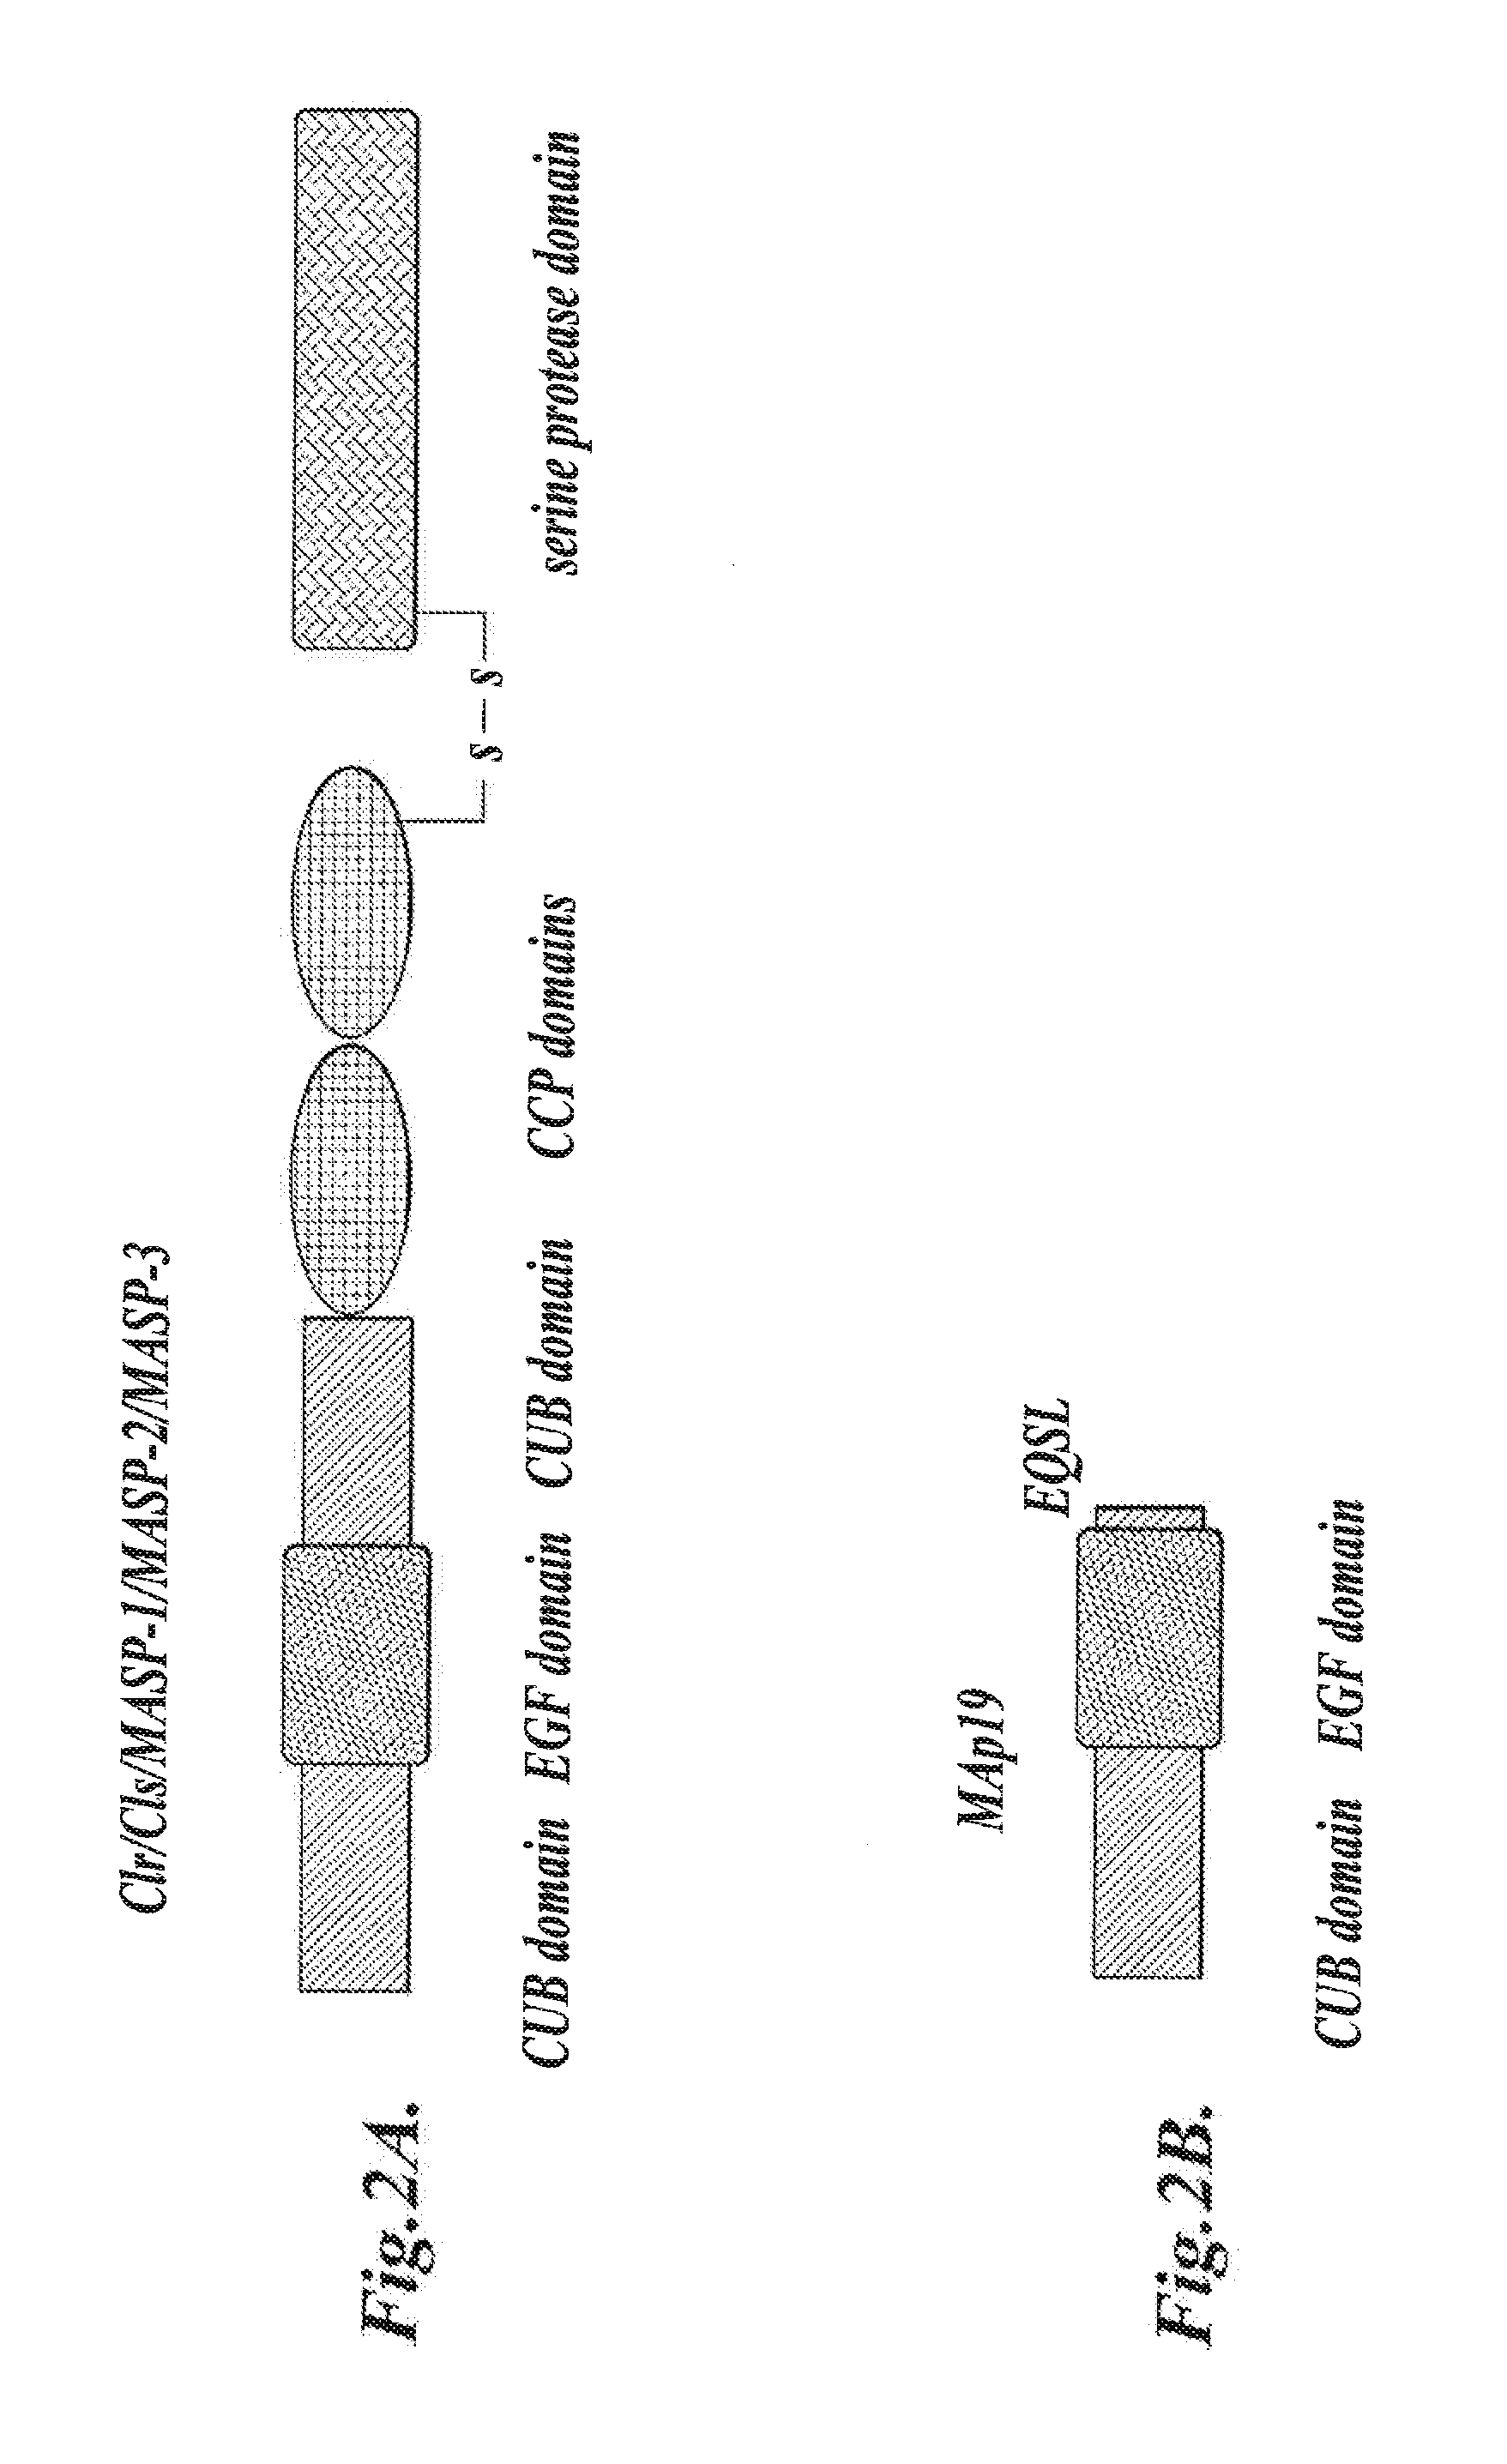 Methods for Treating Conditions Associated with MASP-2 Dependent Complement Activation